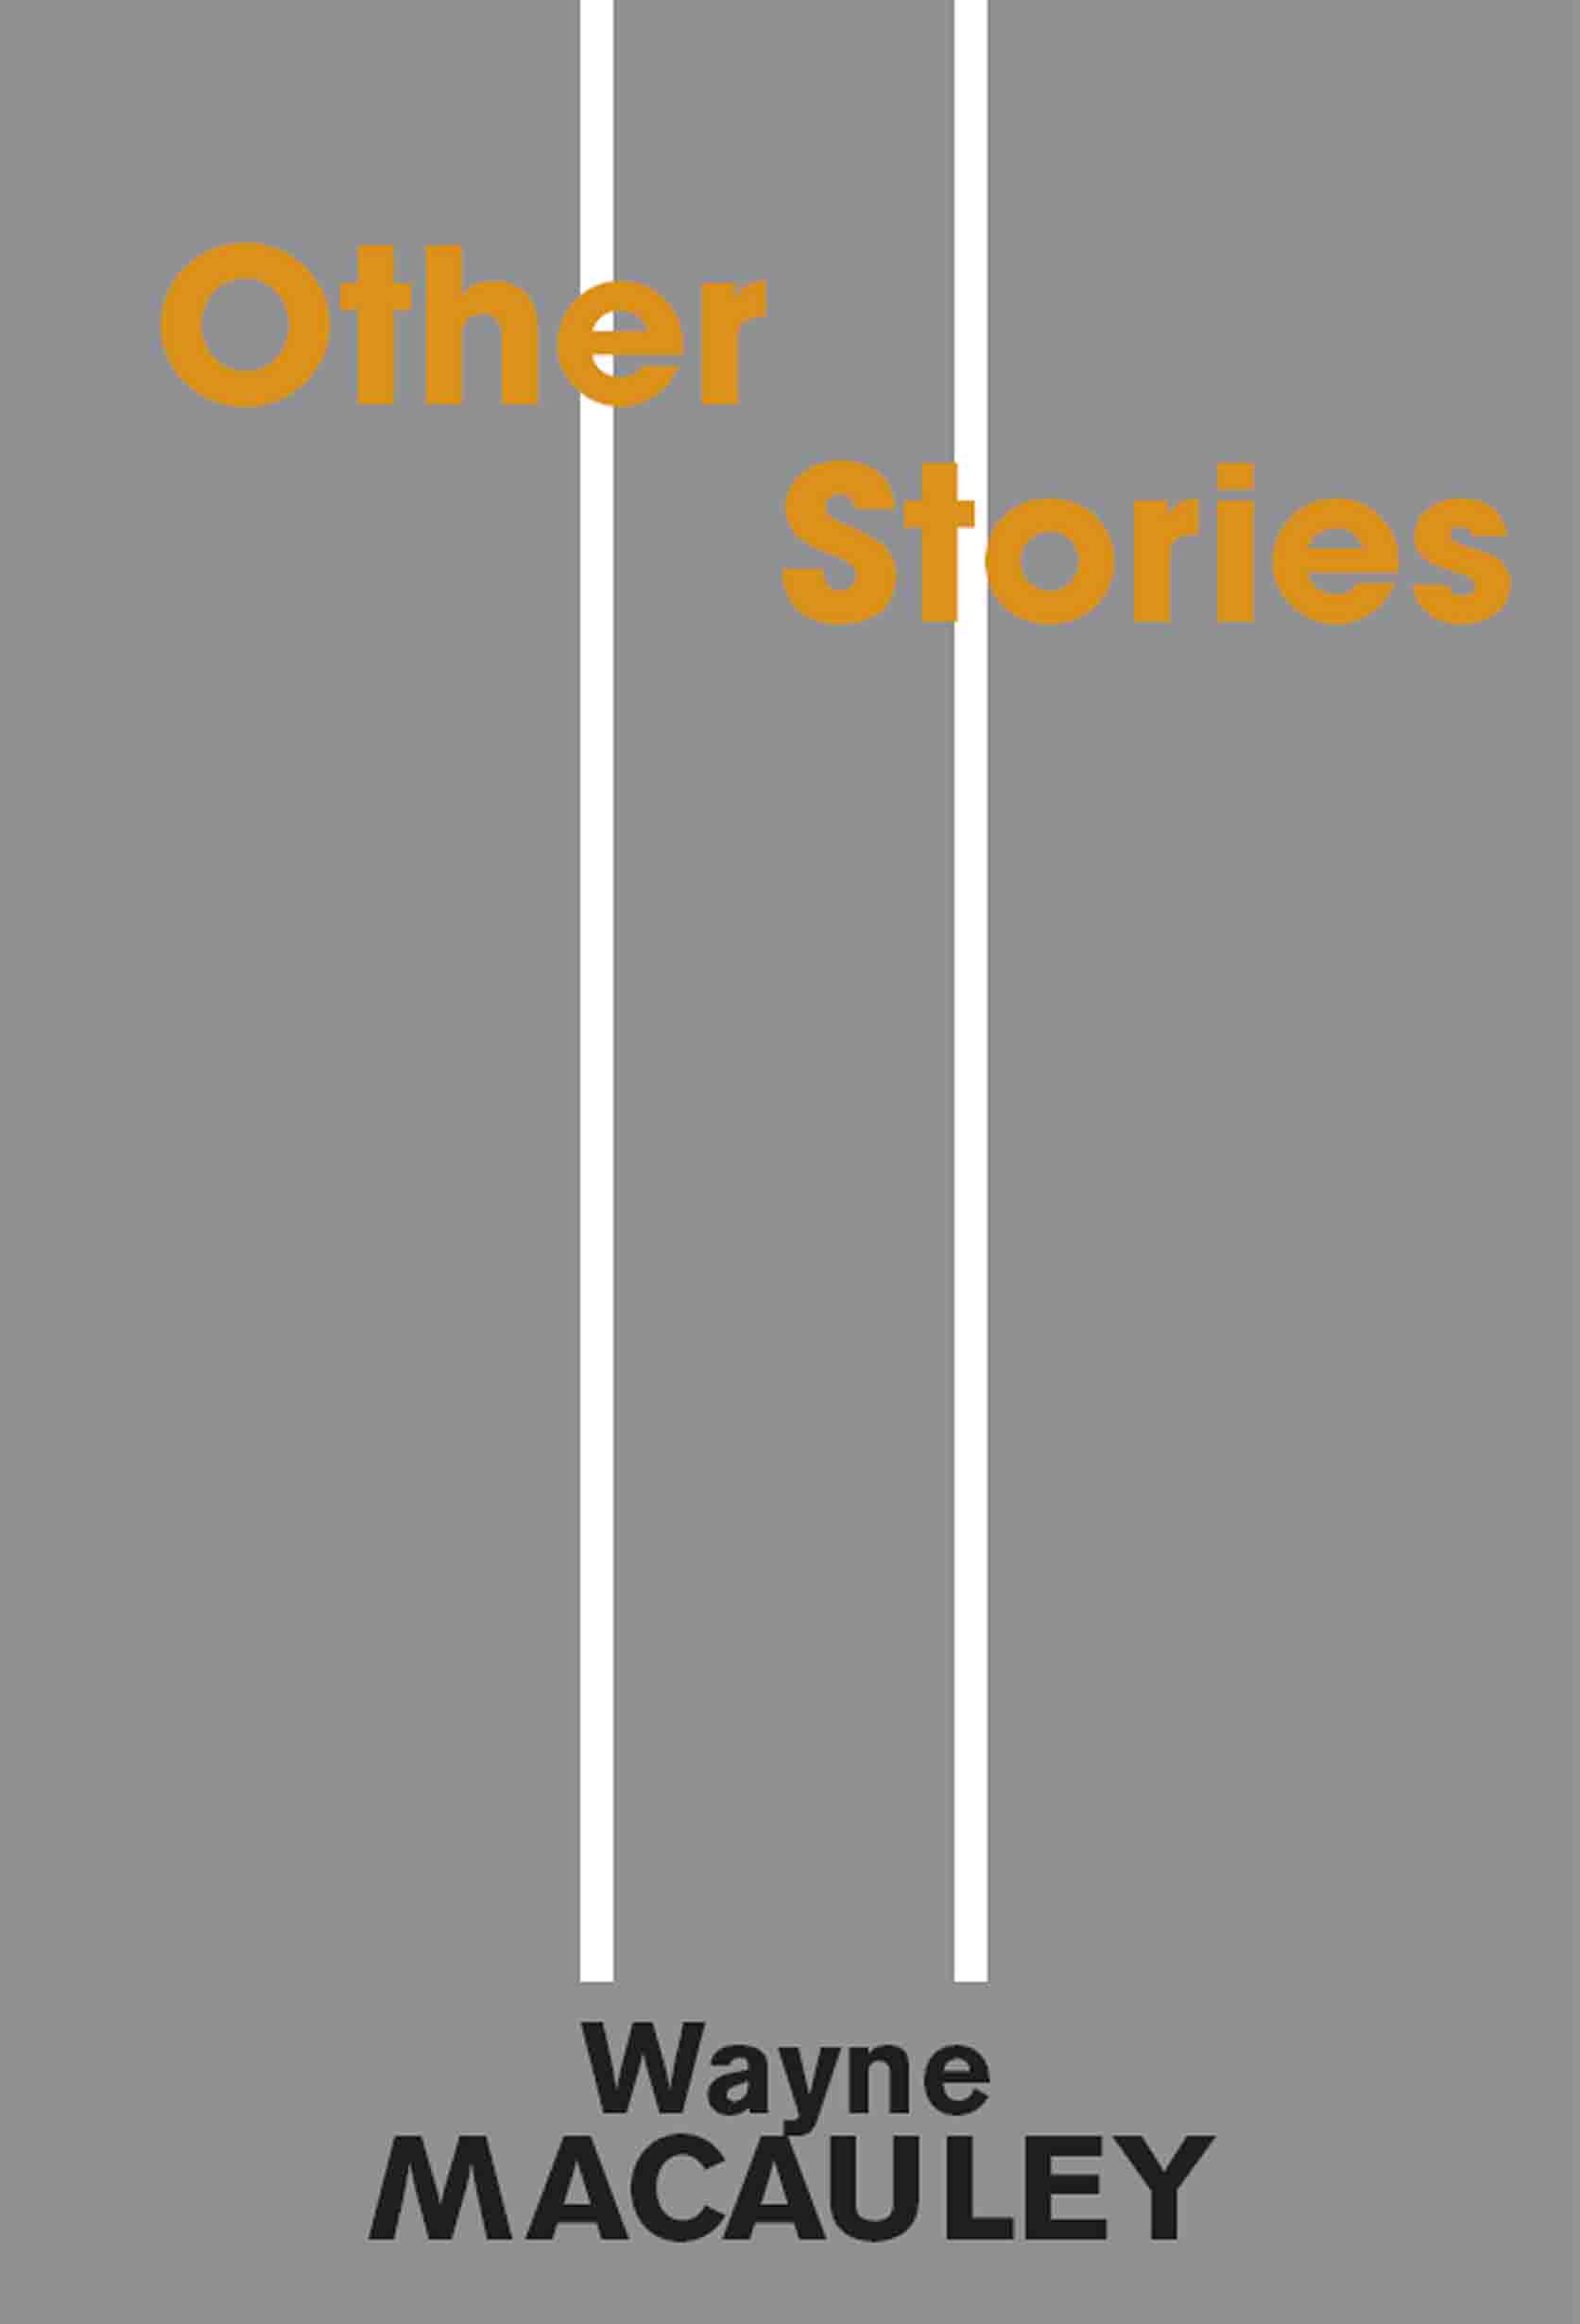 Other Stories cover Wayne Macauley